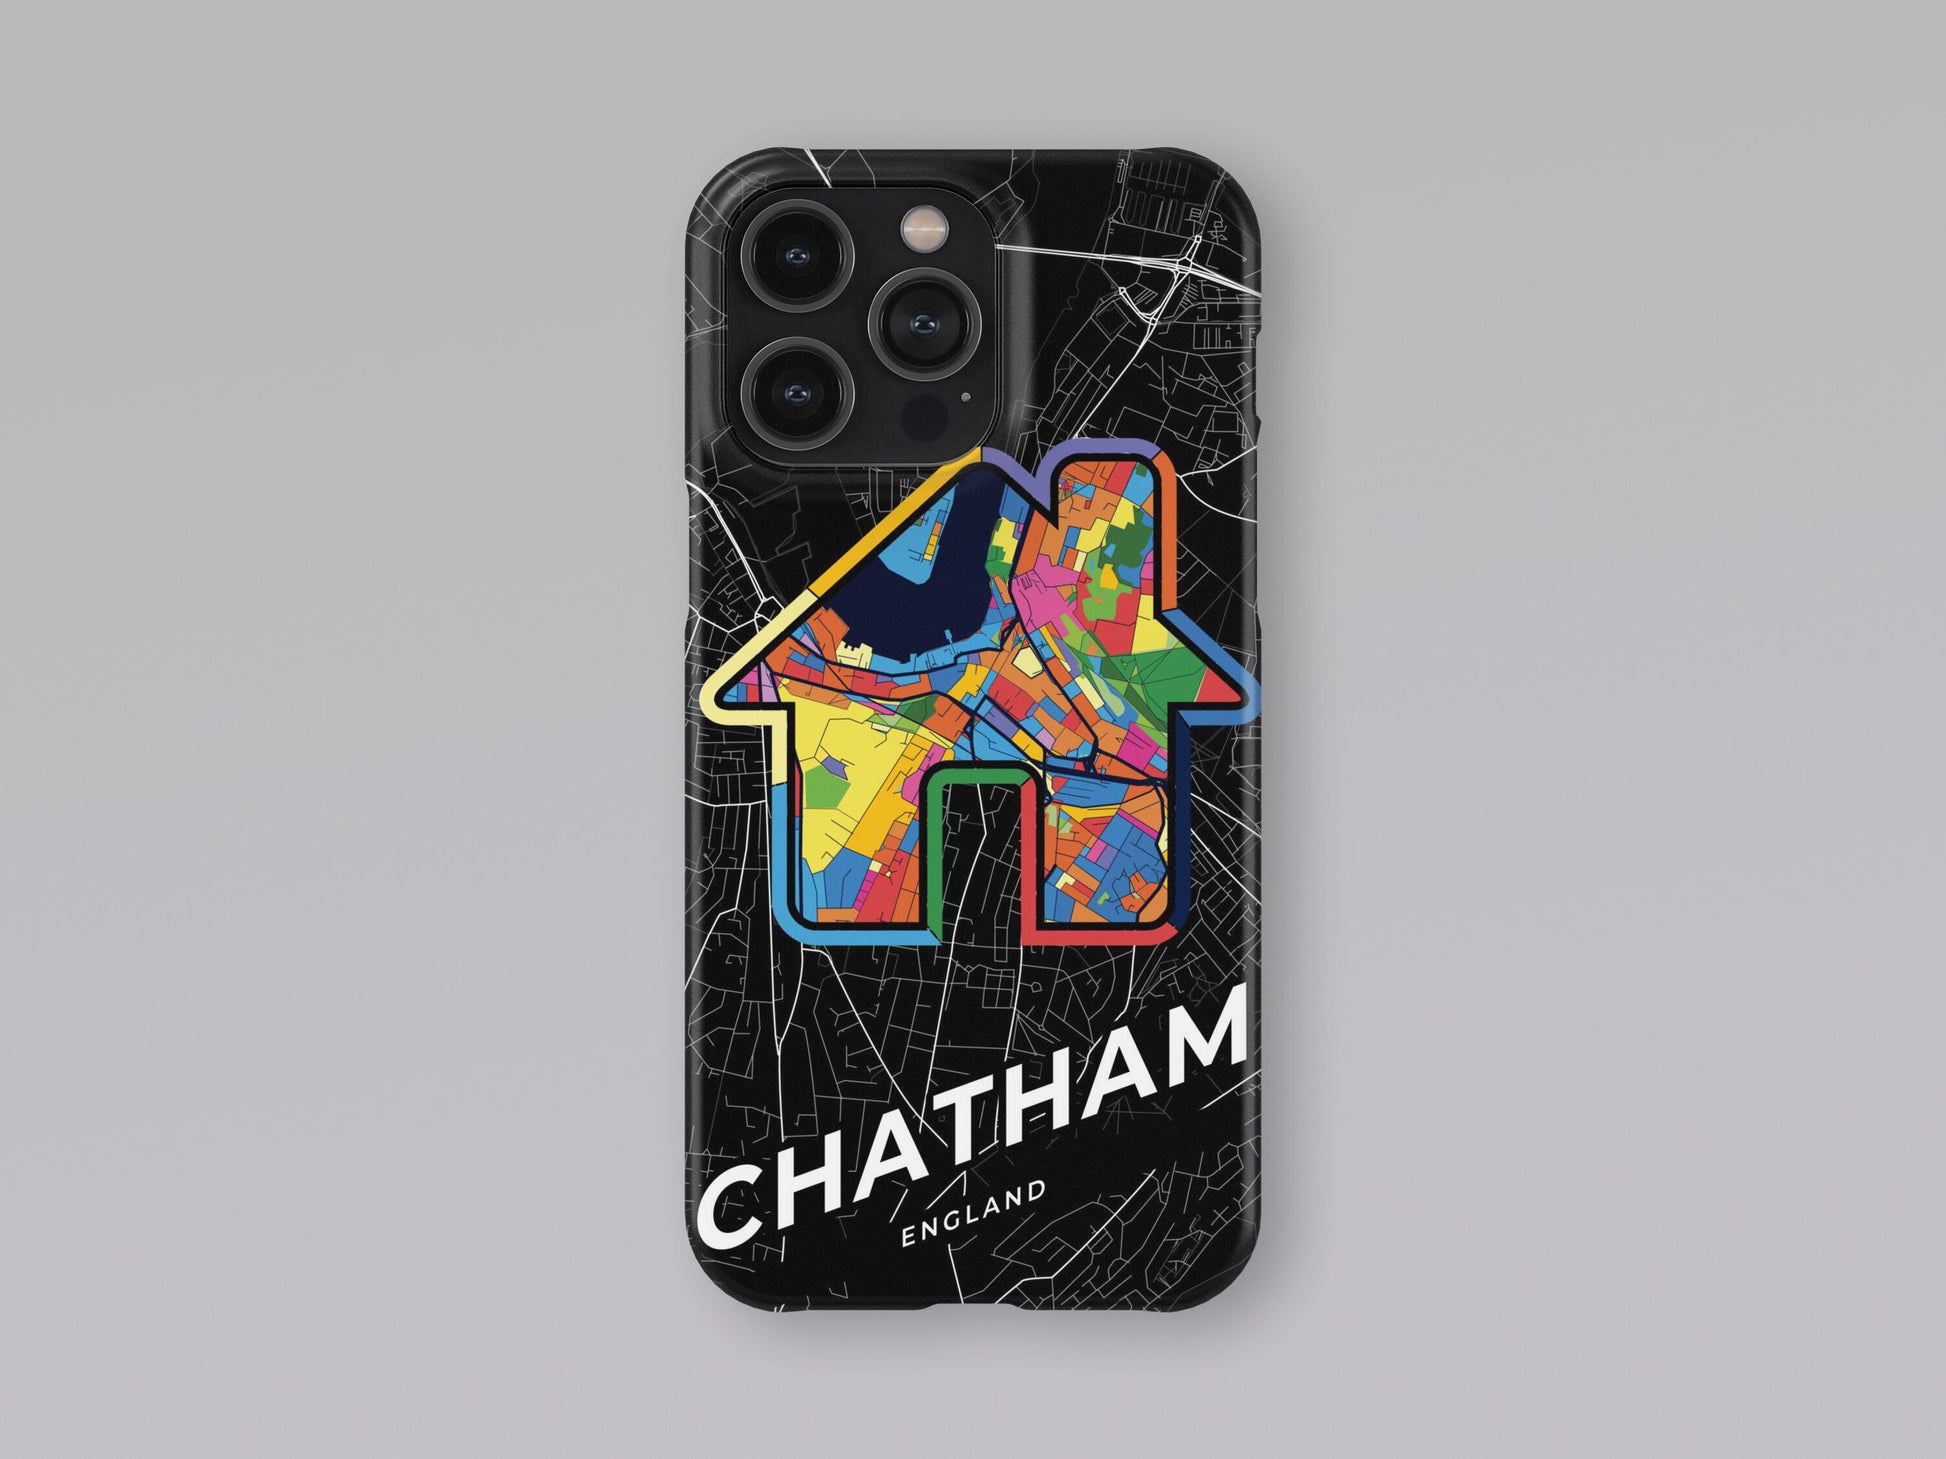 Chatham England slim phone case with colorful icon. Birthday, wedding or housewarming gift. Couple match cases. 3